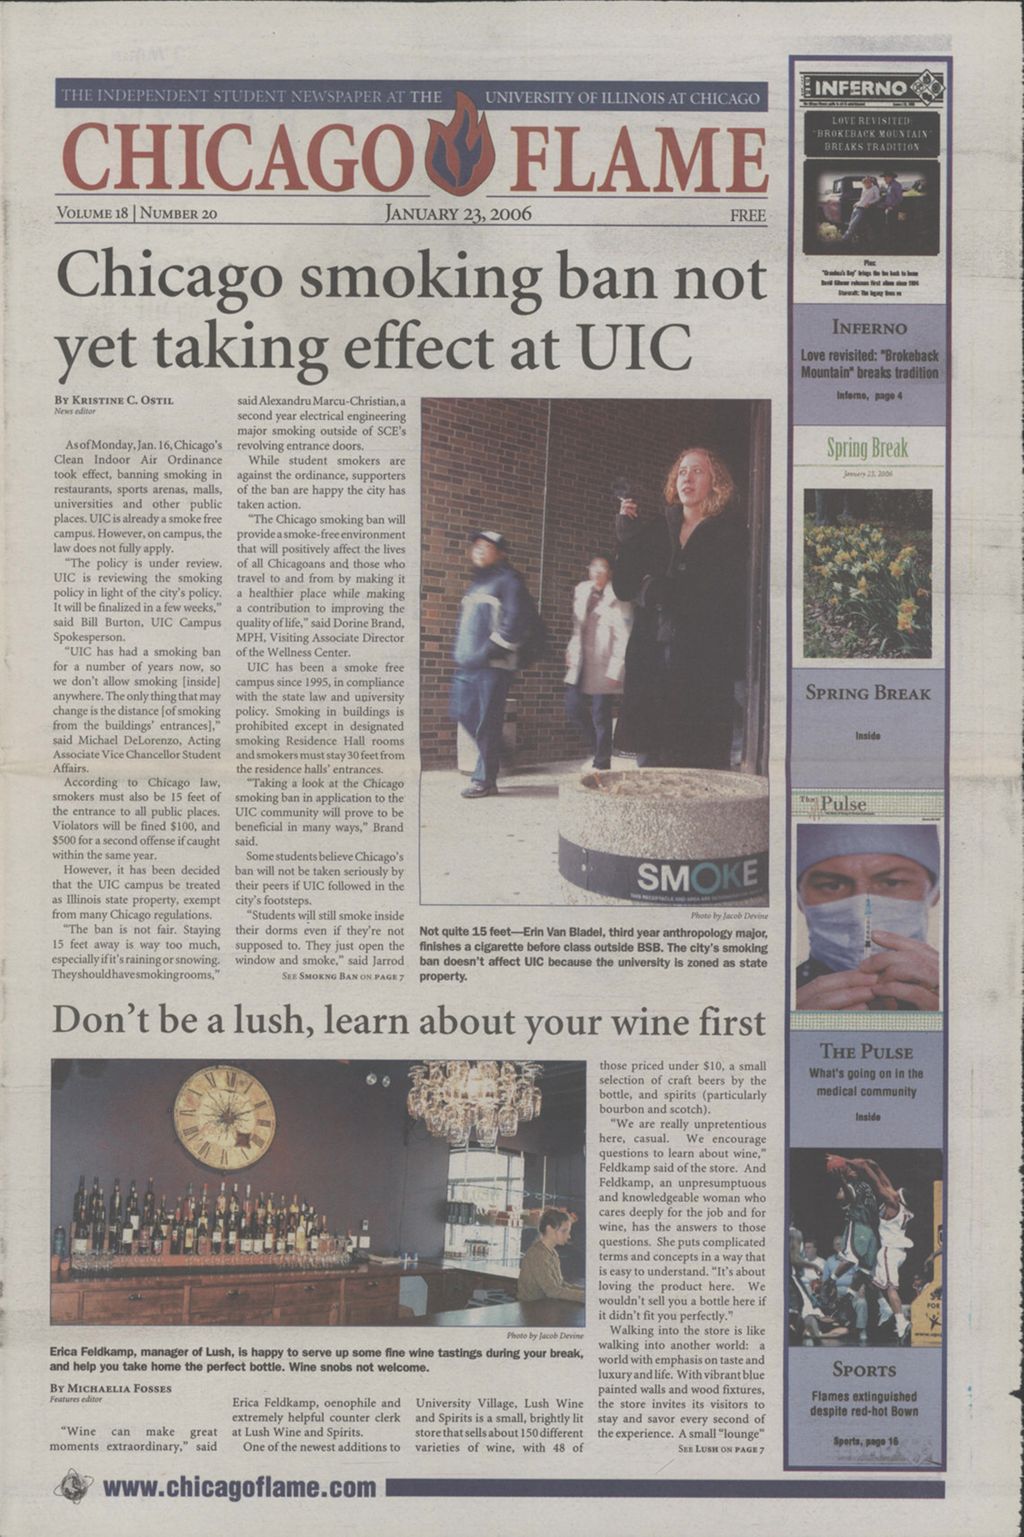 Chicago Flame (January 23, 2006)